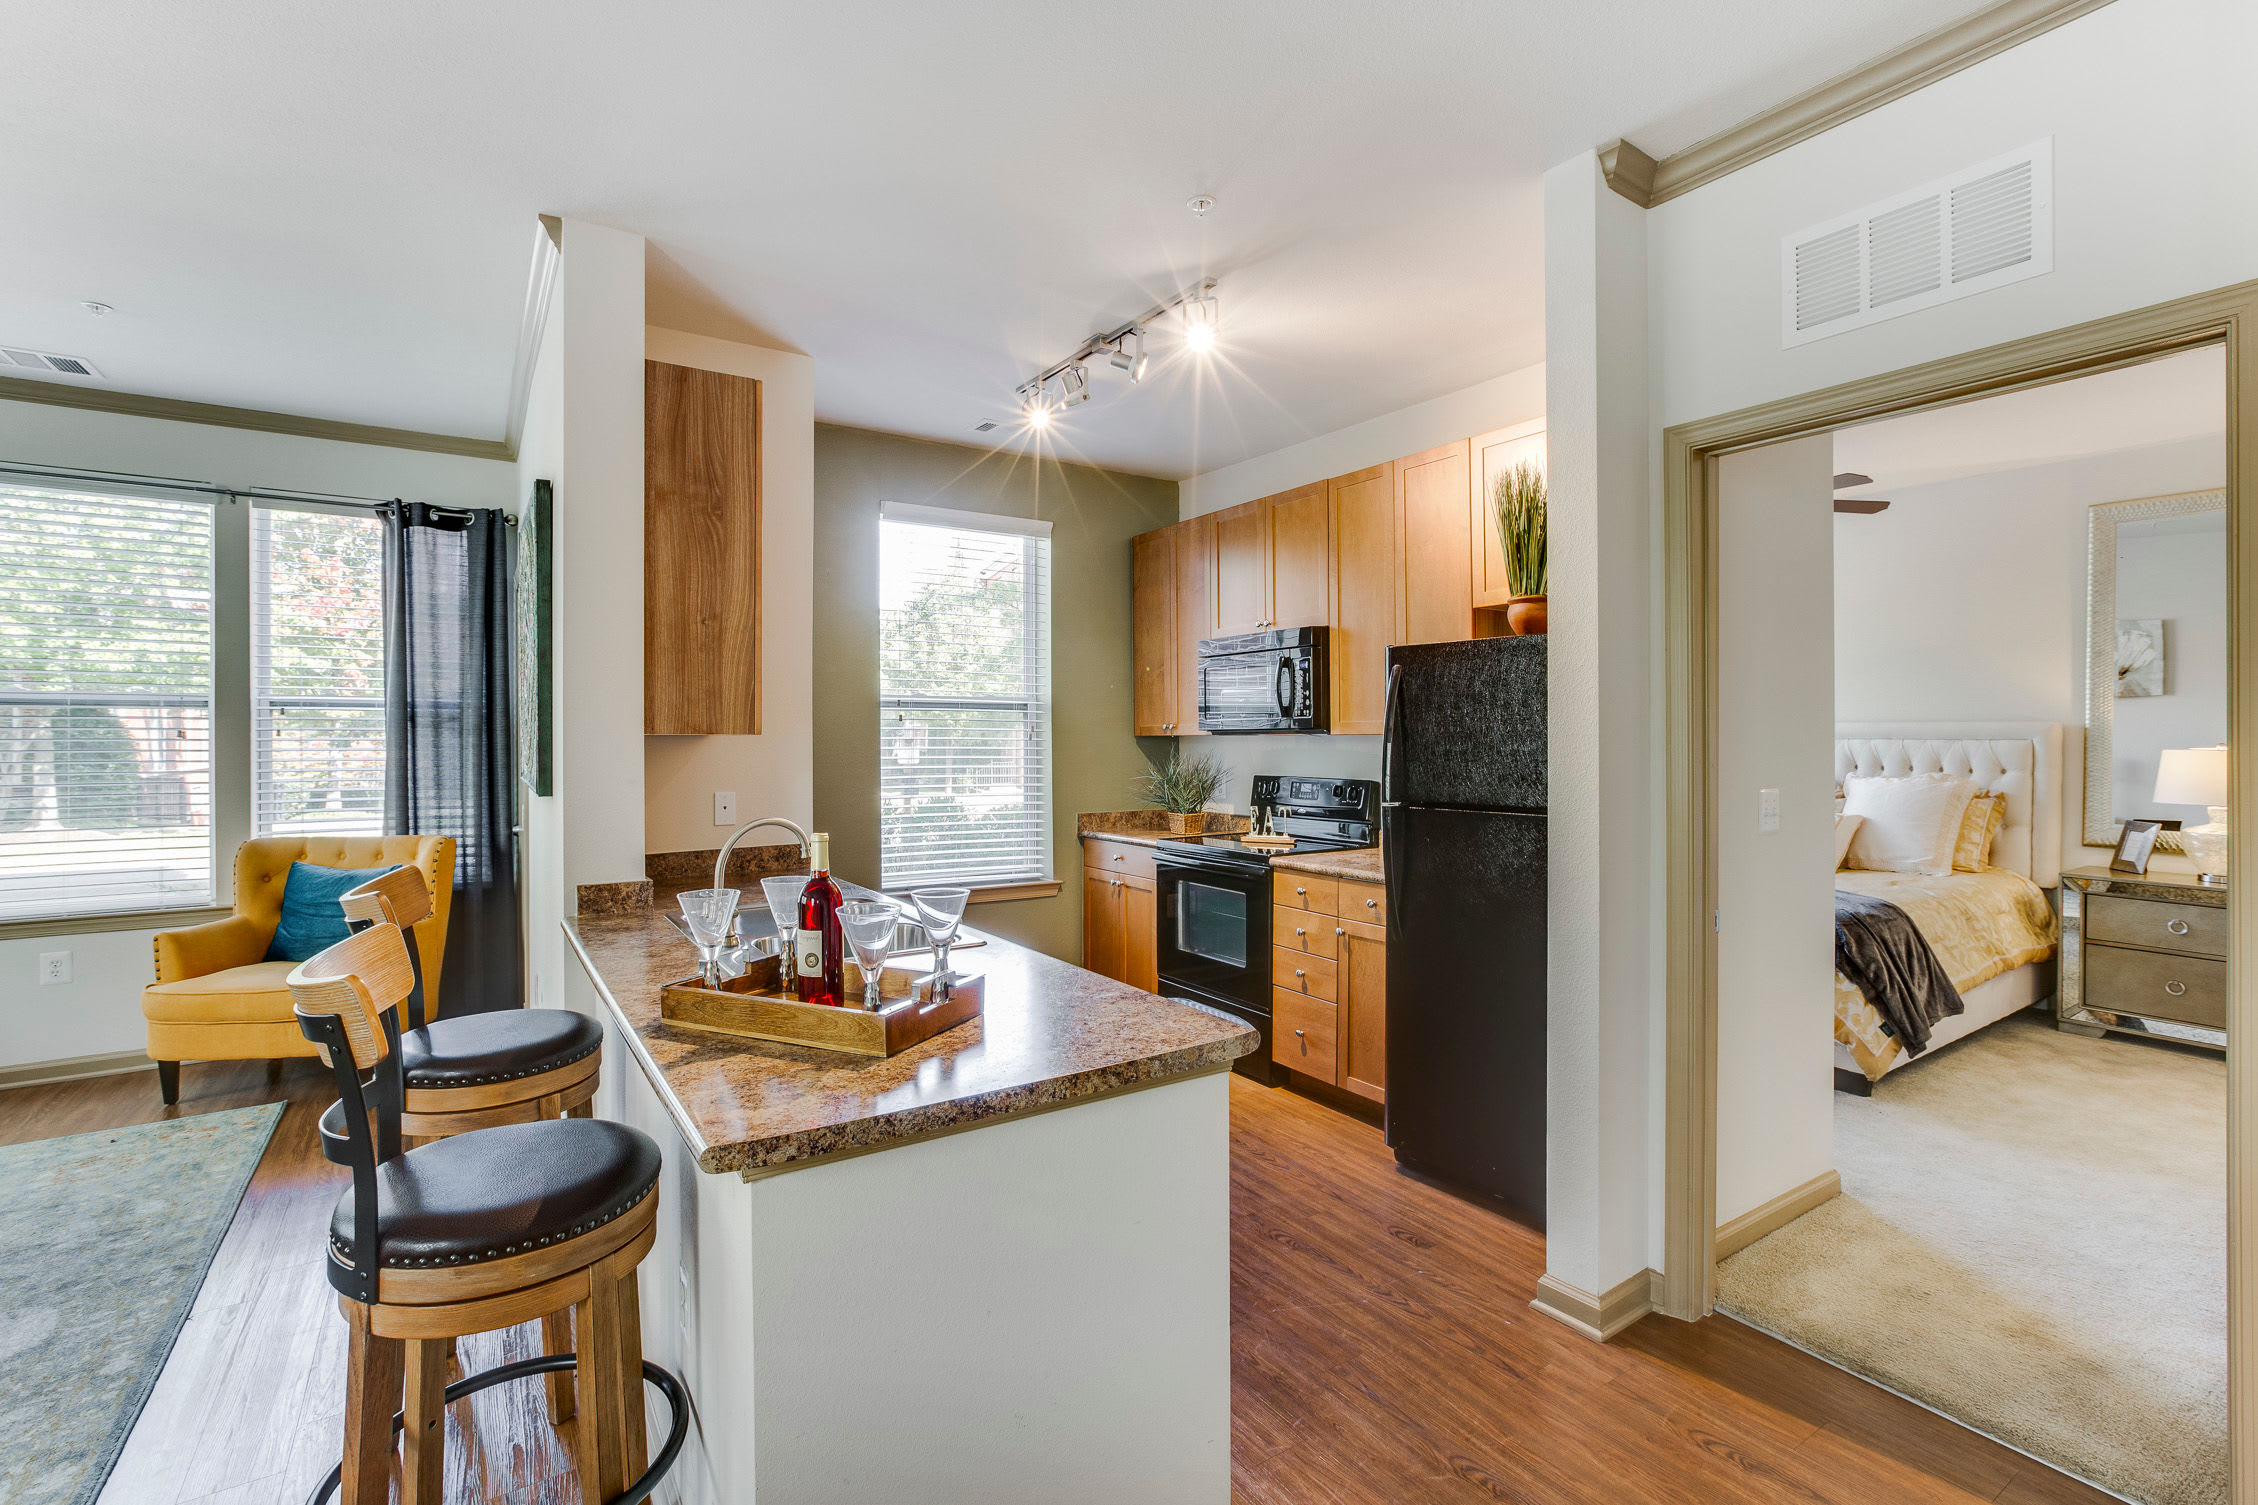 View of the kitchen island next to the bedroom at Summerfield at Morgan Metro in Hyattsville, Maryland